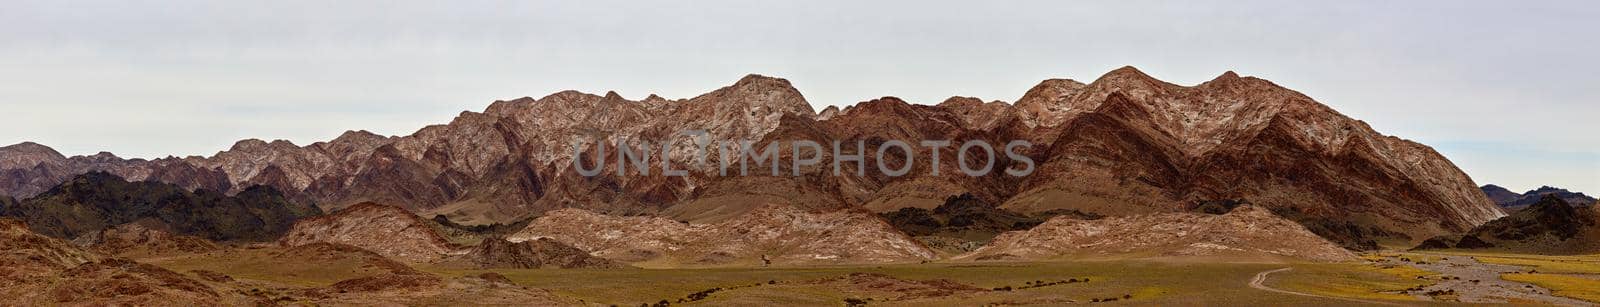 Pasture in the mountains of Mongolia. Landscapes of Mongolia, panorama of mountains in the Gobi desert.